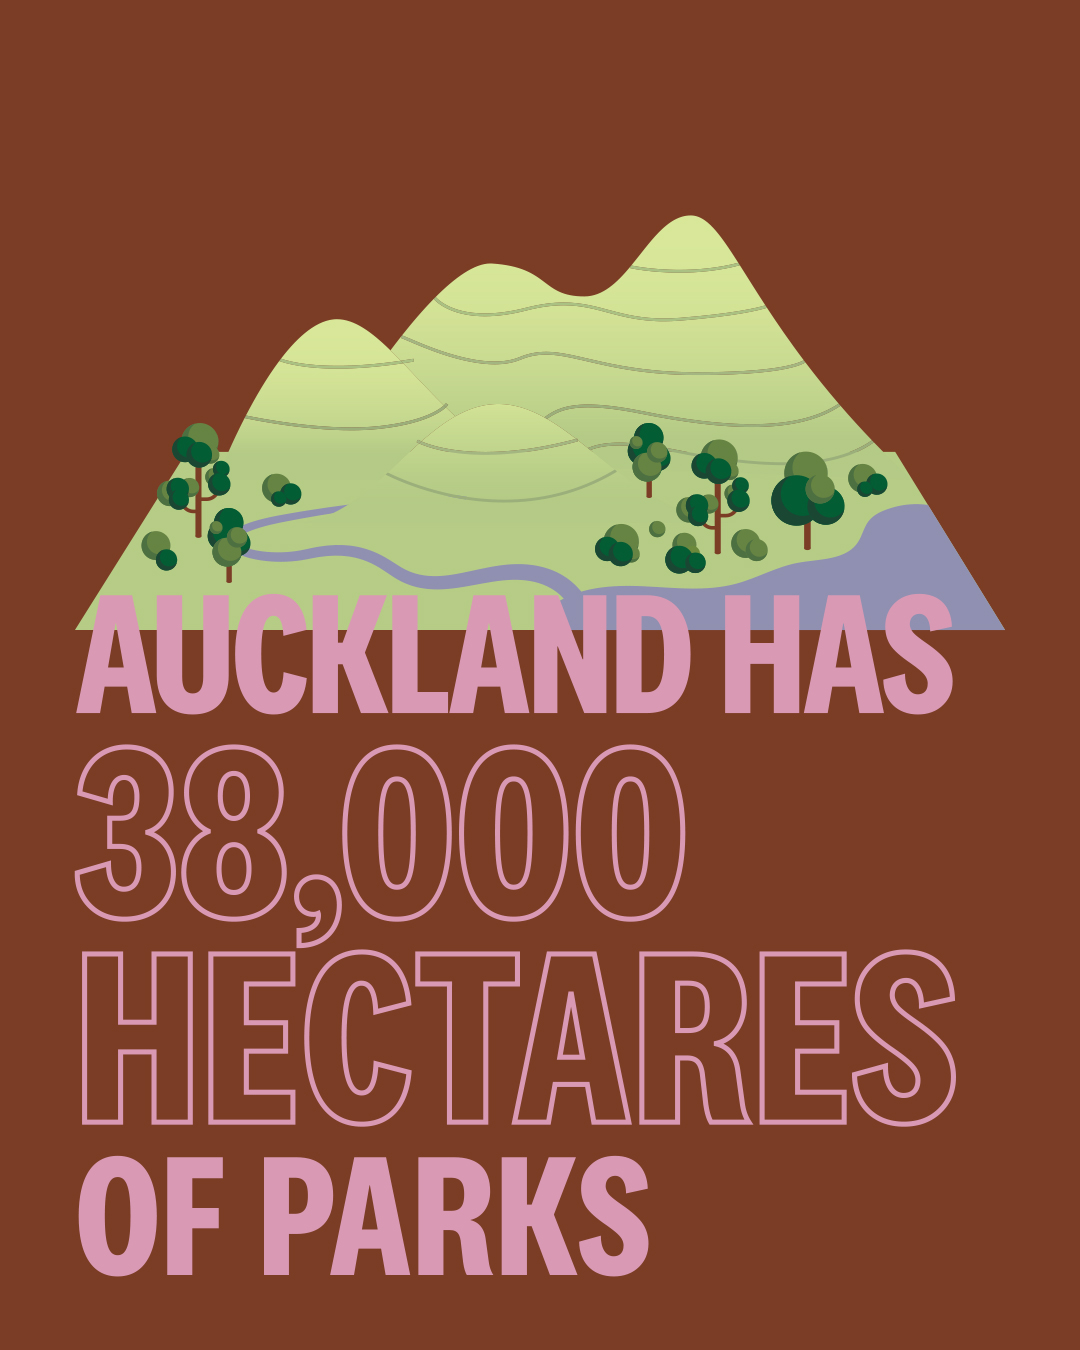 Auckland has 38,000 hectares of parks. That’s the equivalent of 38,000 rugby fields.